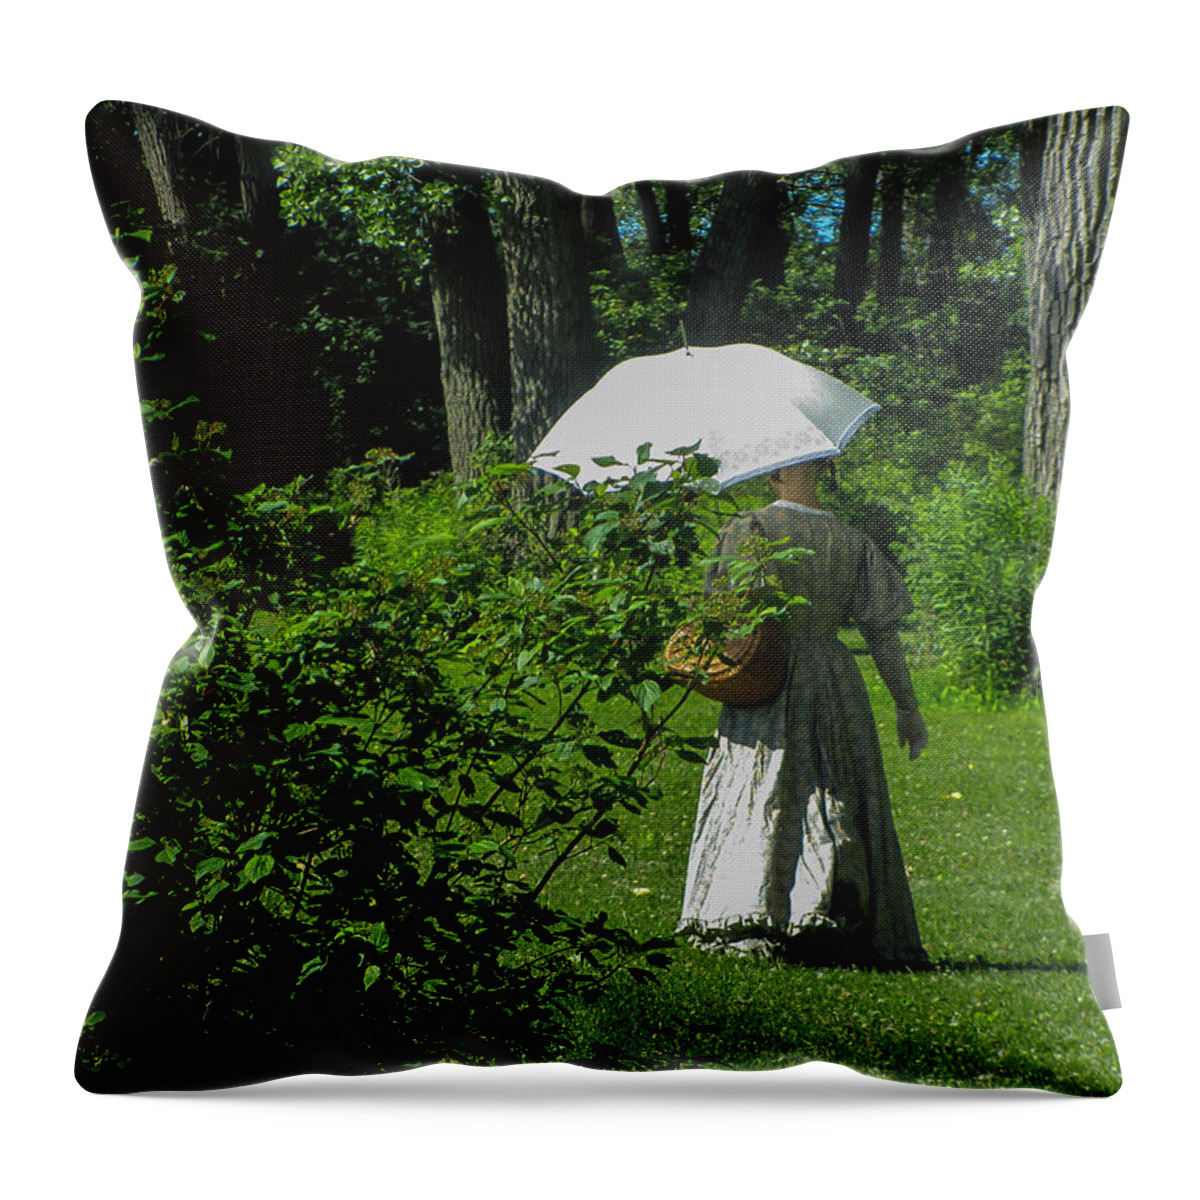  Teenager Victorian Frame Antique Damsel Part Vintage Decoration Pattern Isolated Mademoiselle Lassie Fanciful Antediluvian Feudal Young Lady Pleasing Artful Affected Antiquated Ingenious She Archaic Whimsical Parasol Enchanting Colonial Captivating Baroque Schoolgirl Gothic James Canning Fine Art Throw Pillow featuring the photograph Victorian Damsel by James Canning